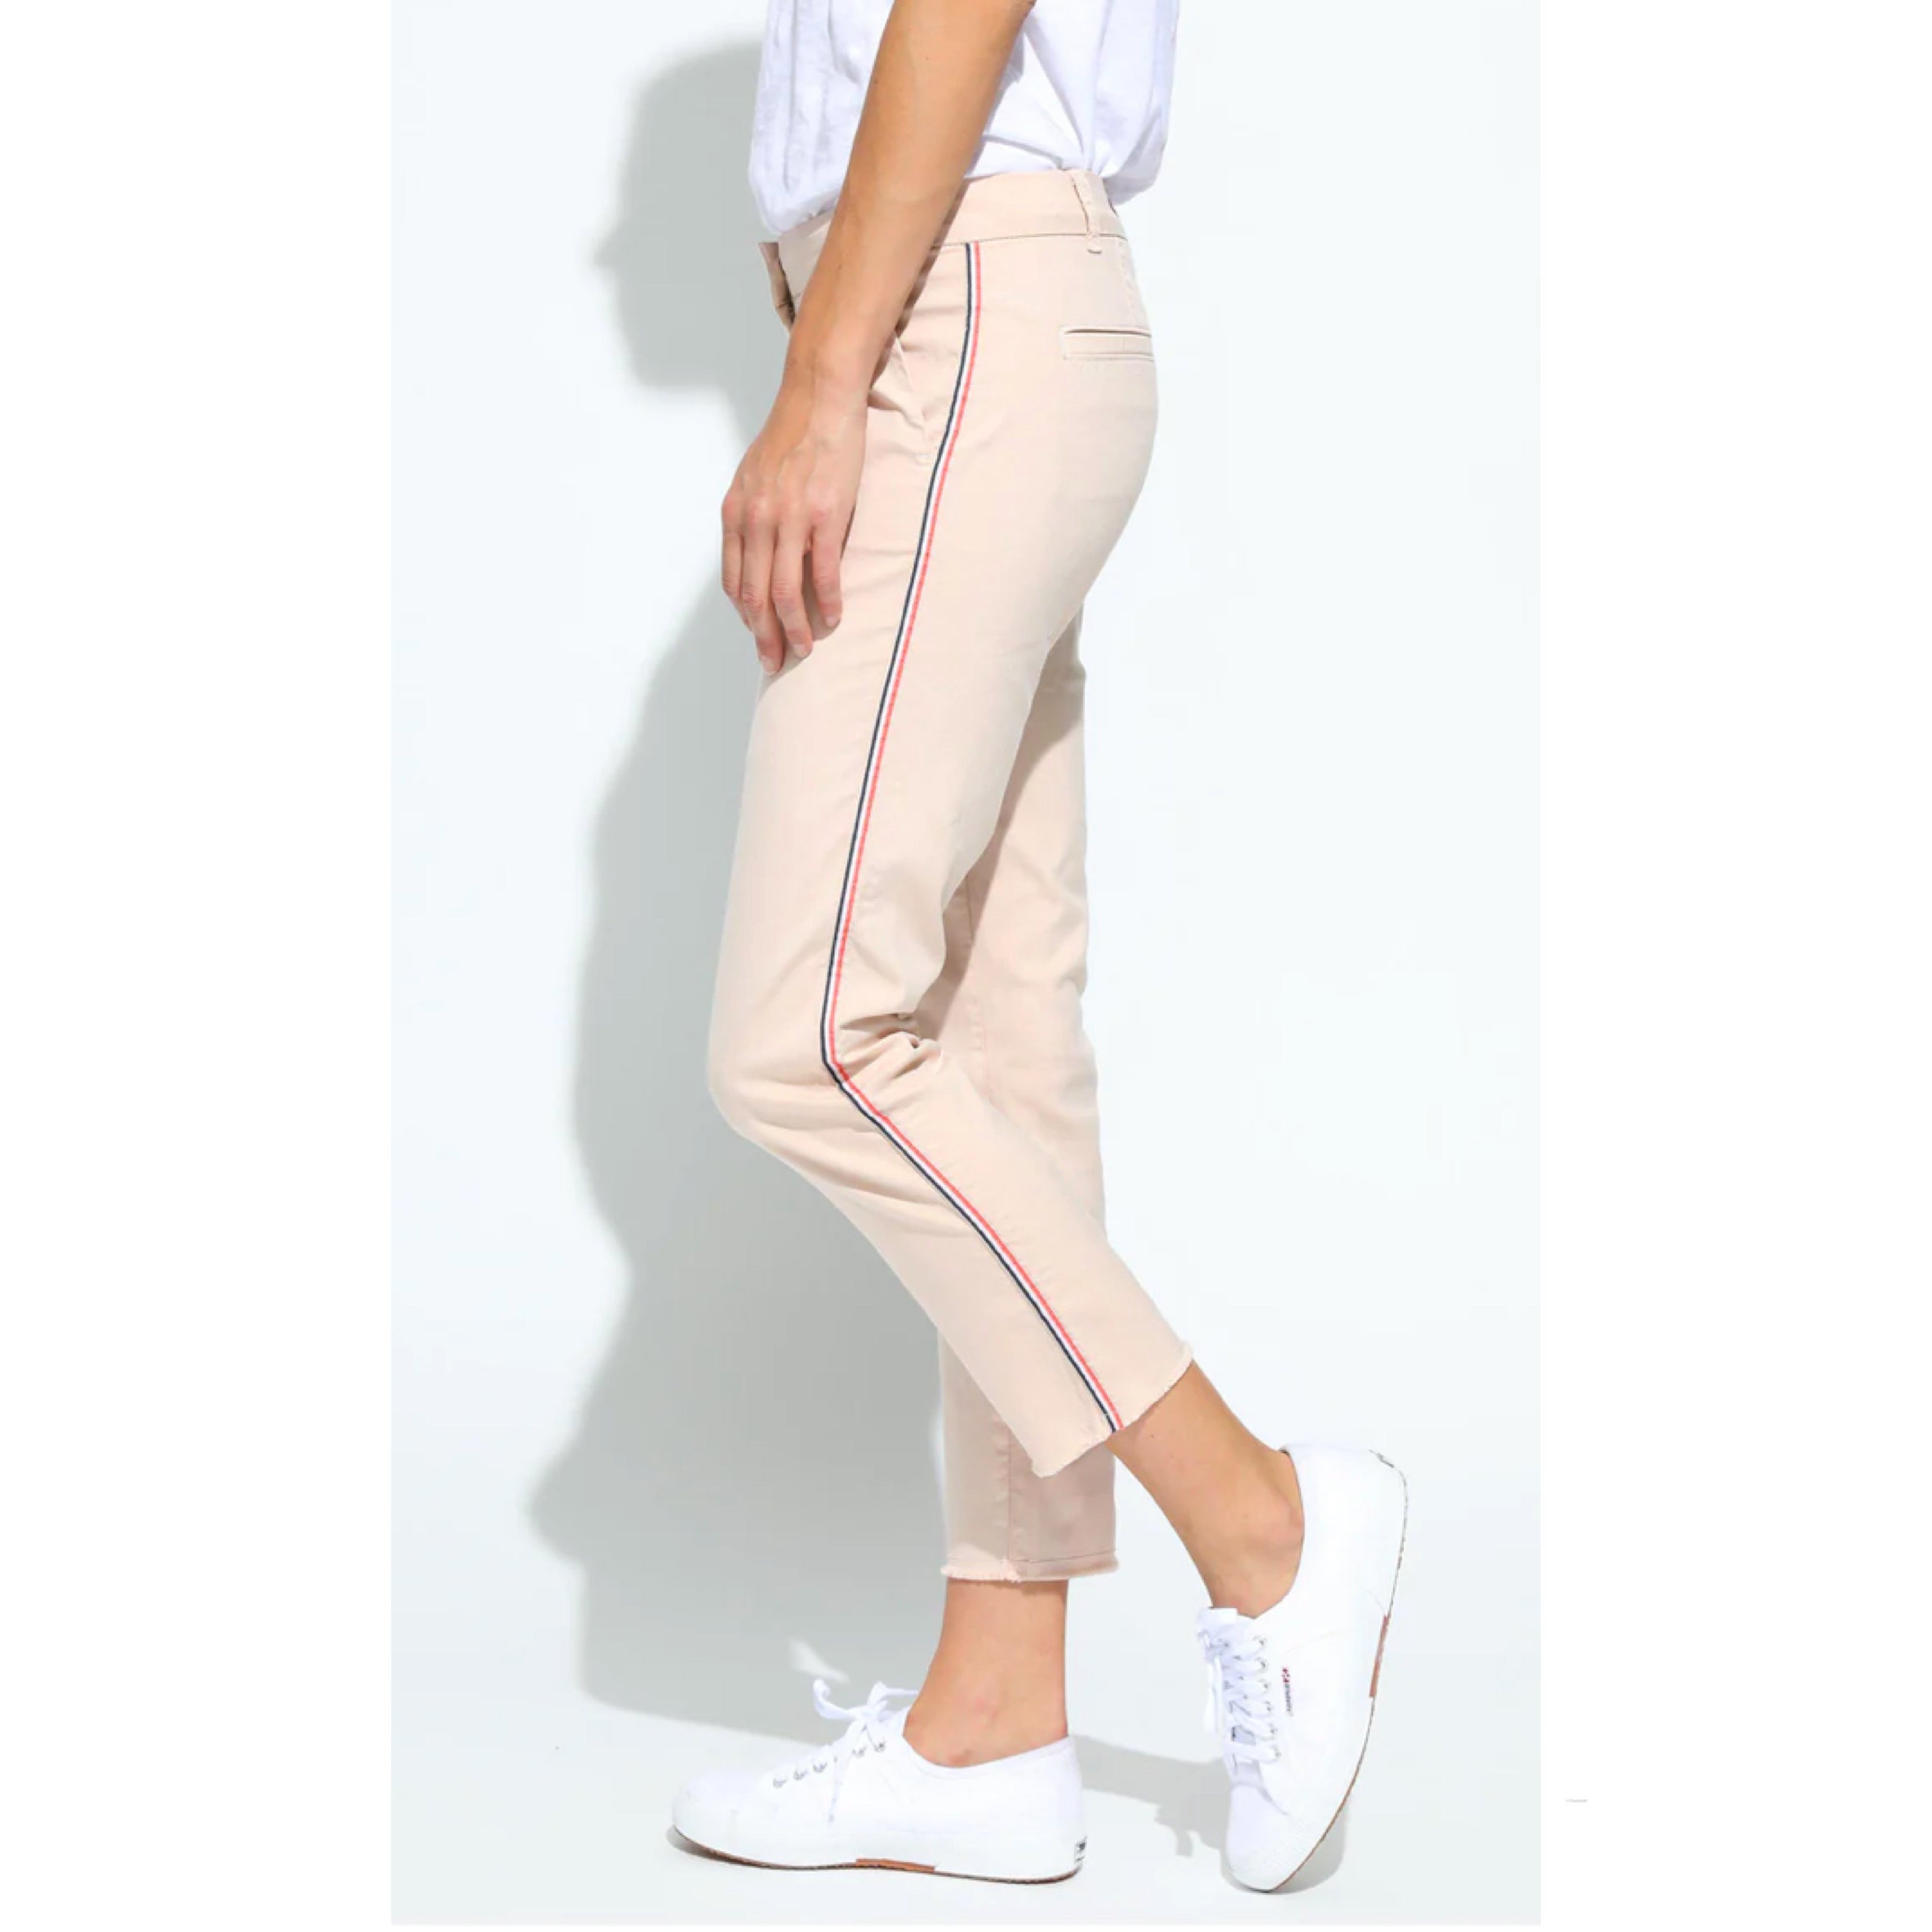 Sundry le Soleil blush pants, size 27, NEW WITH TAGS!